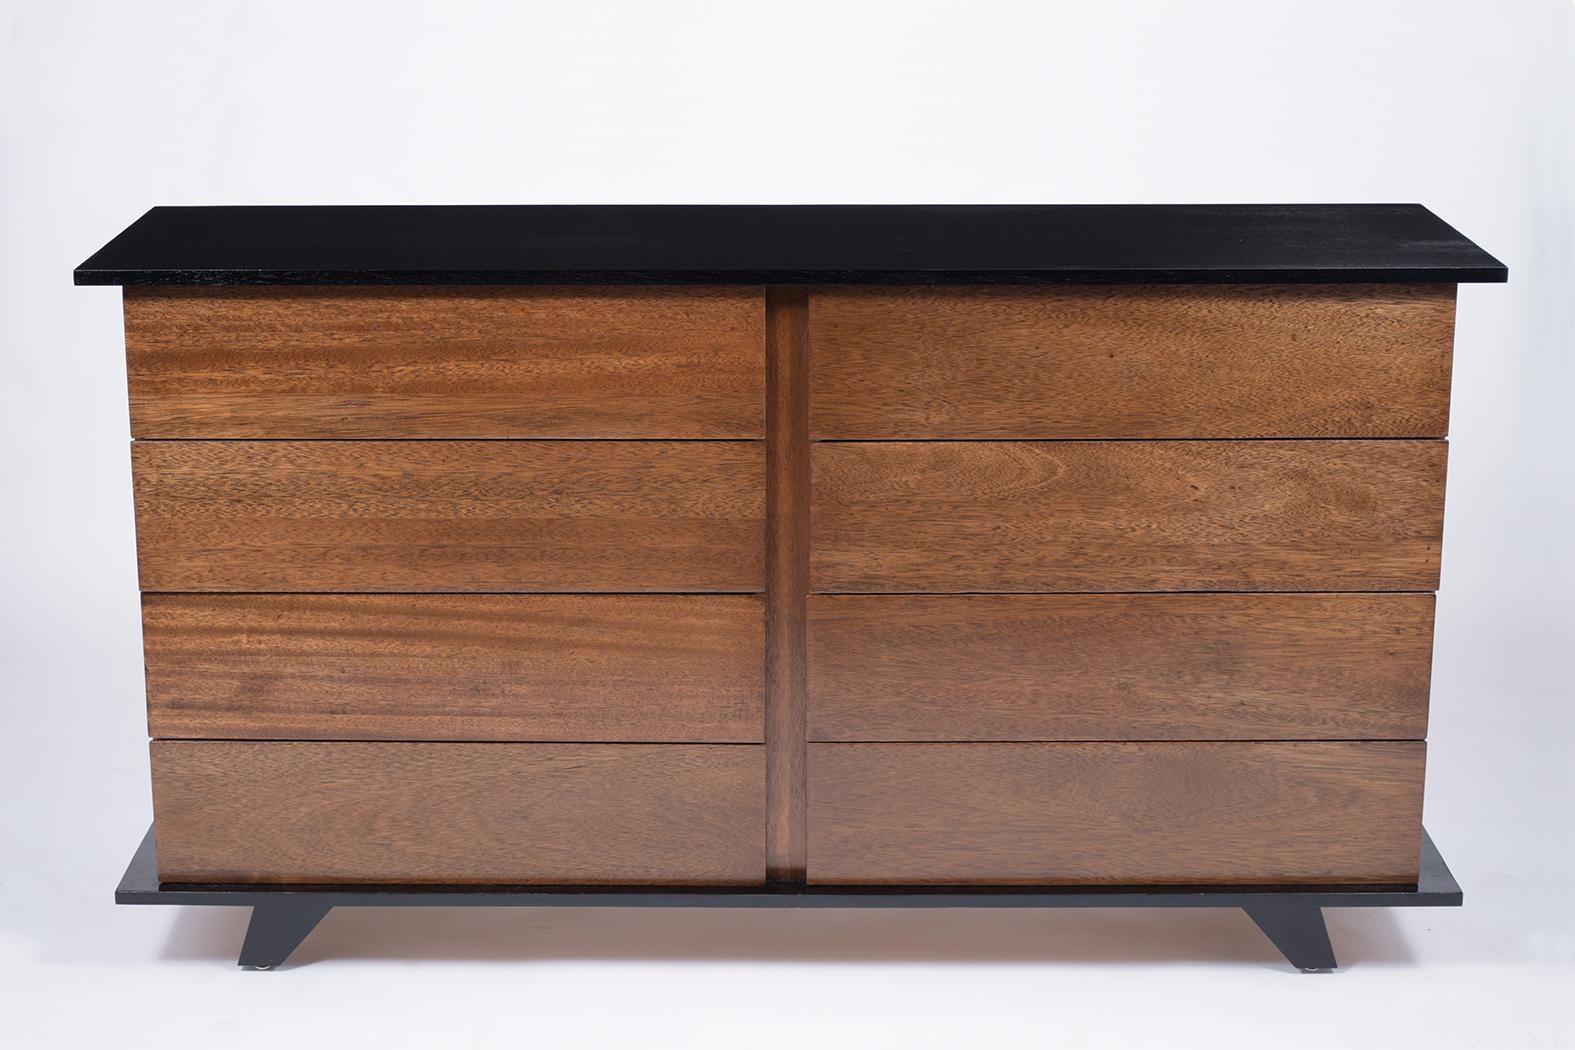 A sleek 1960's Modern Chest of Drawers handcrafted out of walnut wood features walnut stained drawers with an ebonized finish shell that wraps itself around the top and bottom of the piece. This piece comes with eight pullout drawers to open with